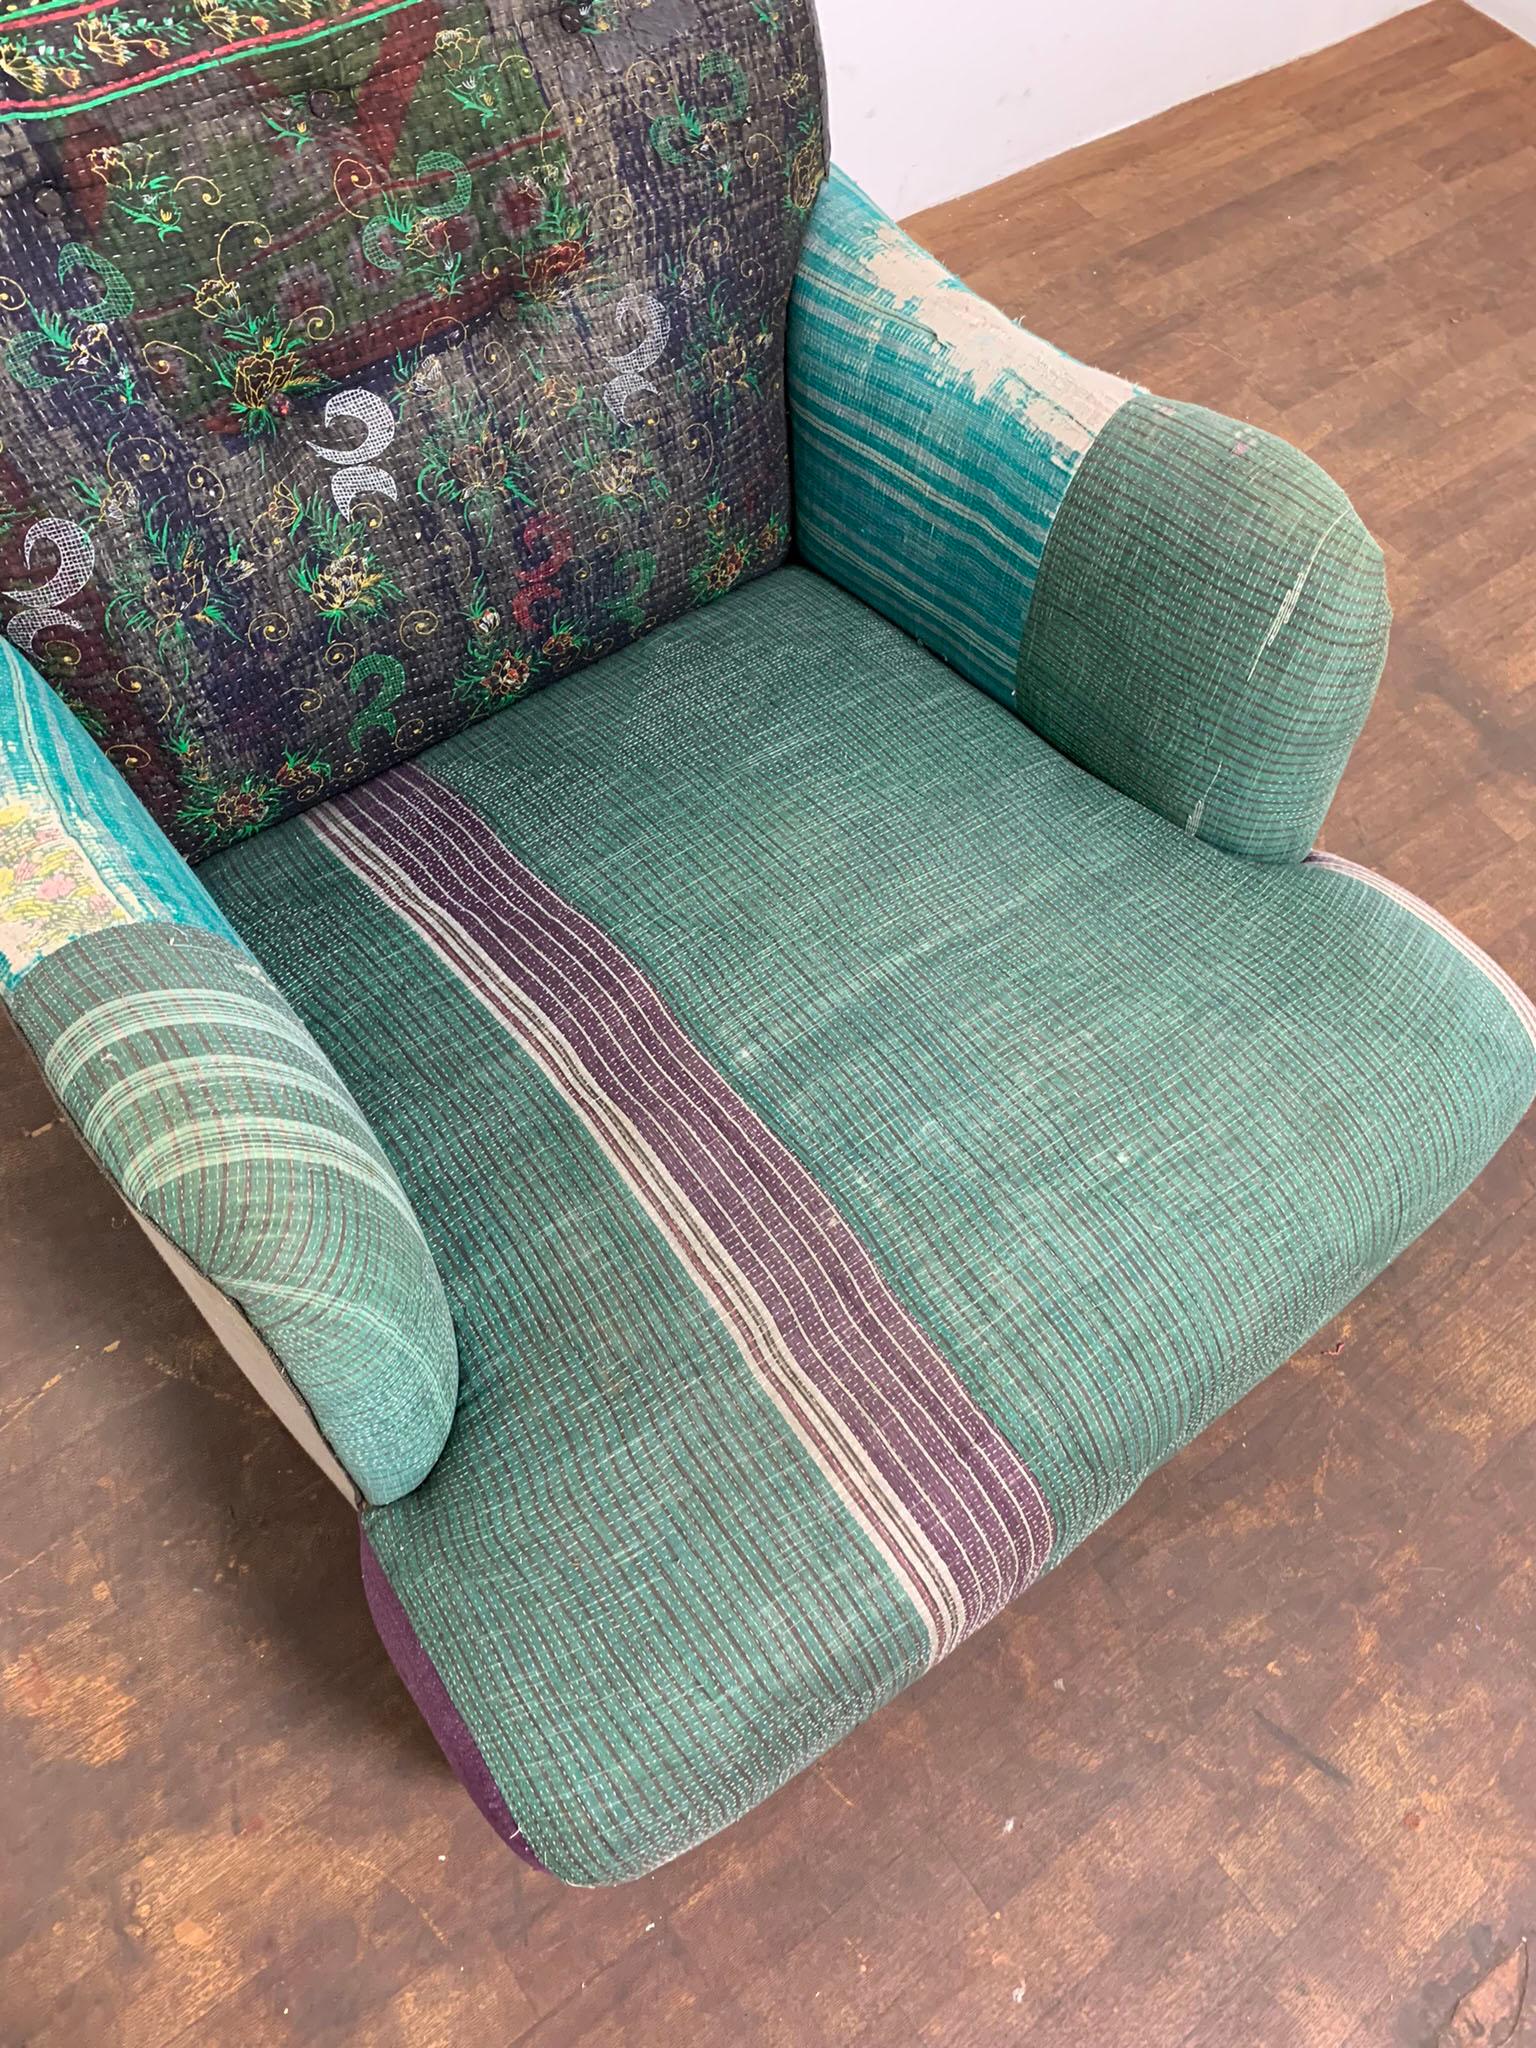 Cisco Brother's Acacia Lounge Chair in Vintage Quilt Upholstery 5